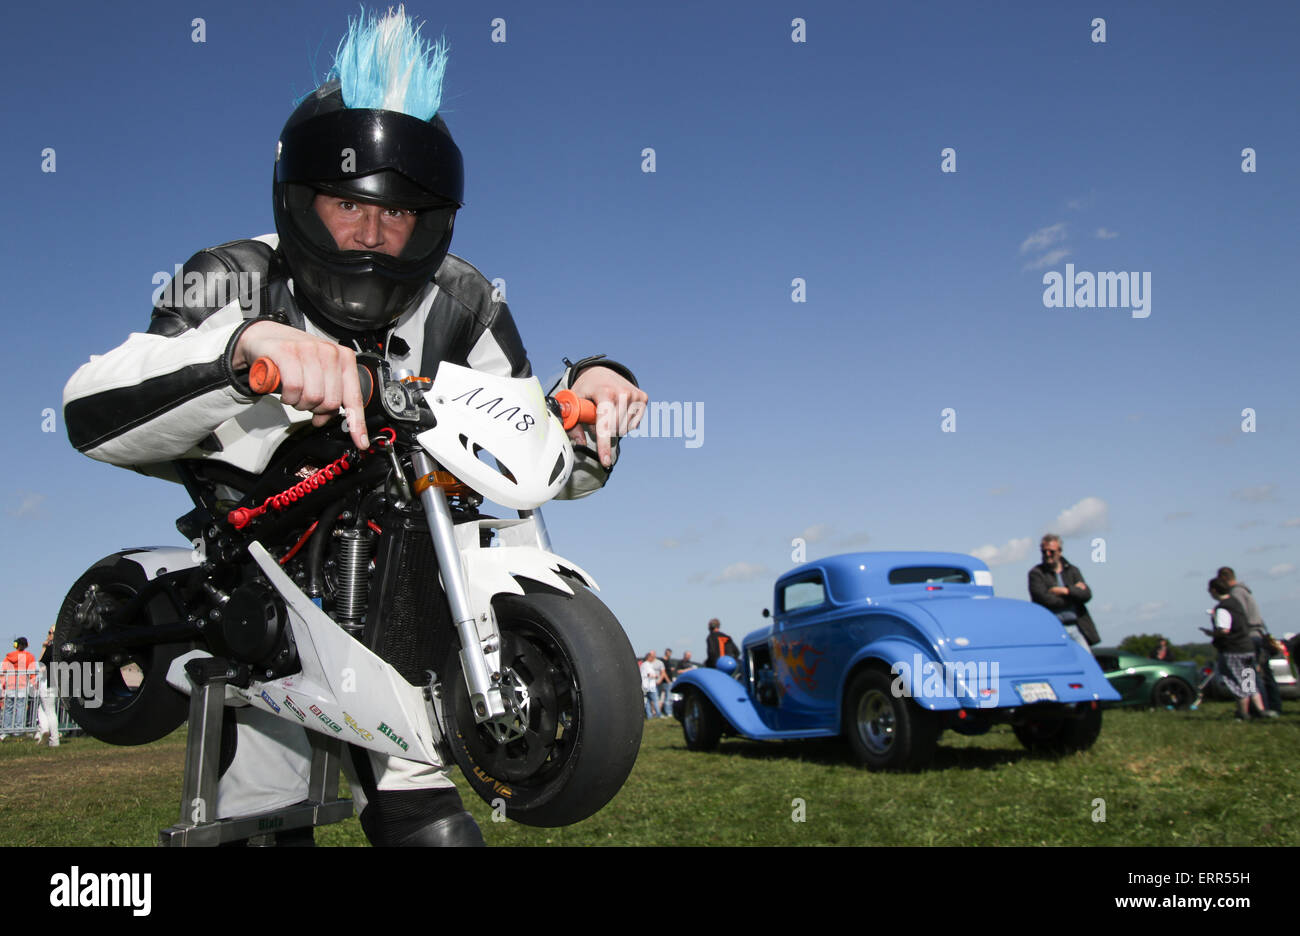 St. Michaelisdonn, Germany. 07th June, 2015. Motorcylist 'Dubios' prepares for the race with his mini motorcylce in St. Michaelisdonn, Germany, 07 June 2015. The drag race with motorcycles and cars takes place for the 9th time at the airfield in St. Michaelisdonn. Photo: AXEL HEIMKEN/dpa/Alamy Live News Stock Photo